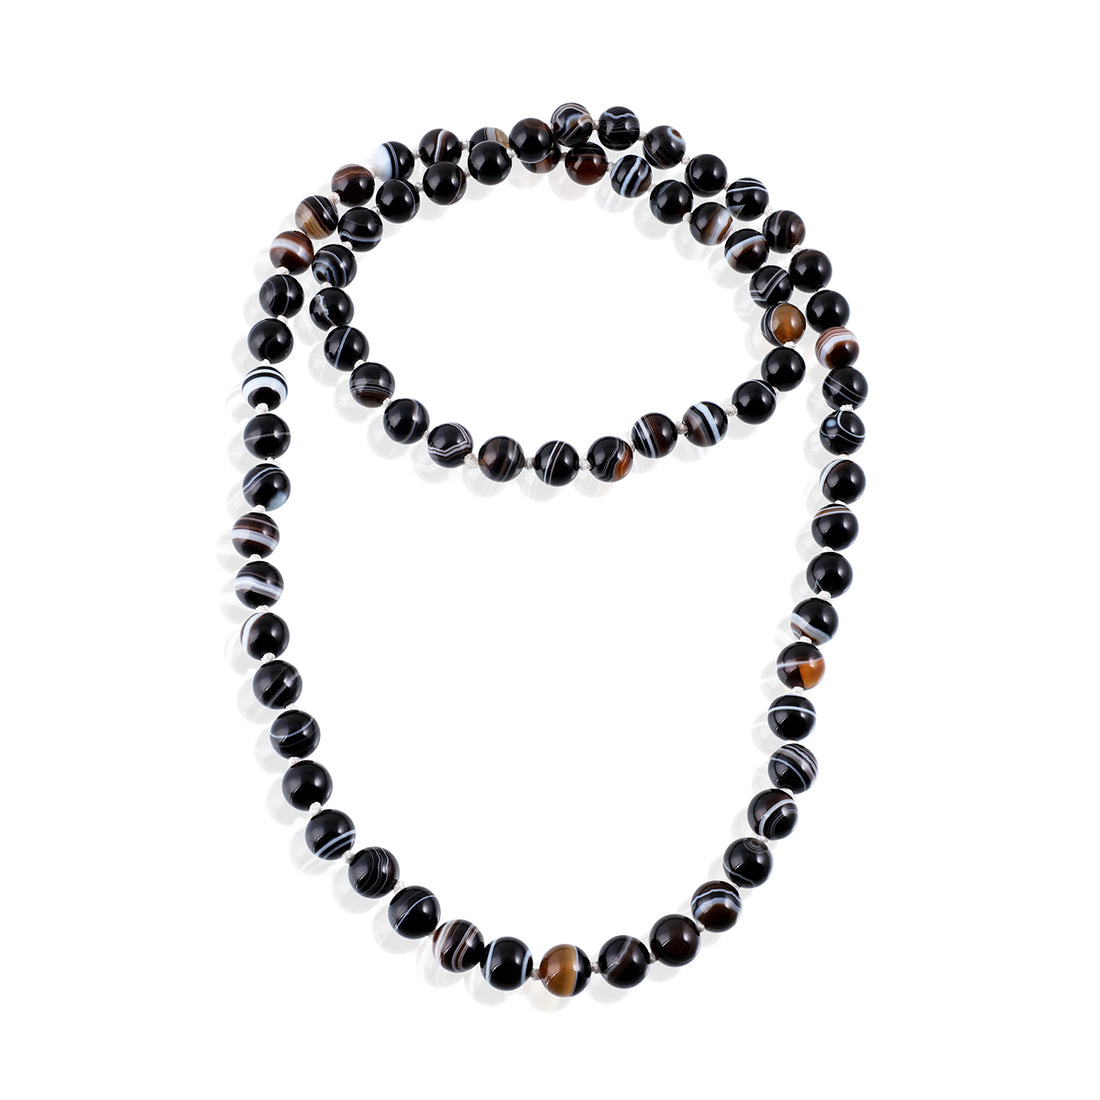 Meditation Practice with Black Banded Agate Mala